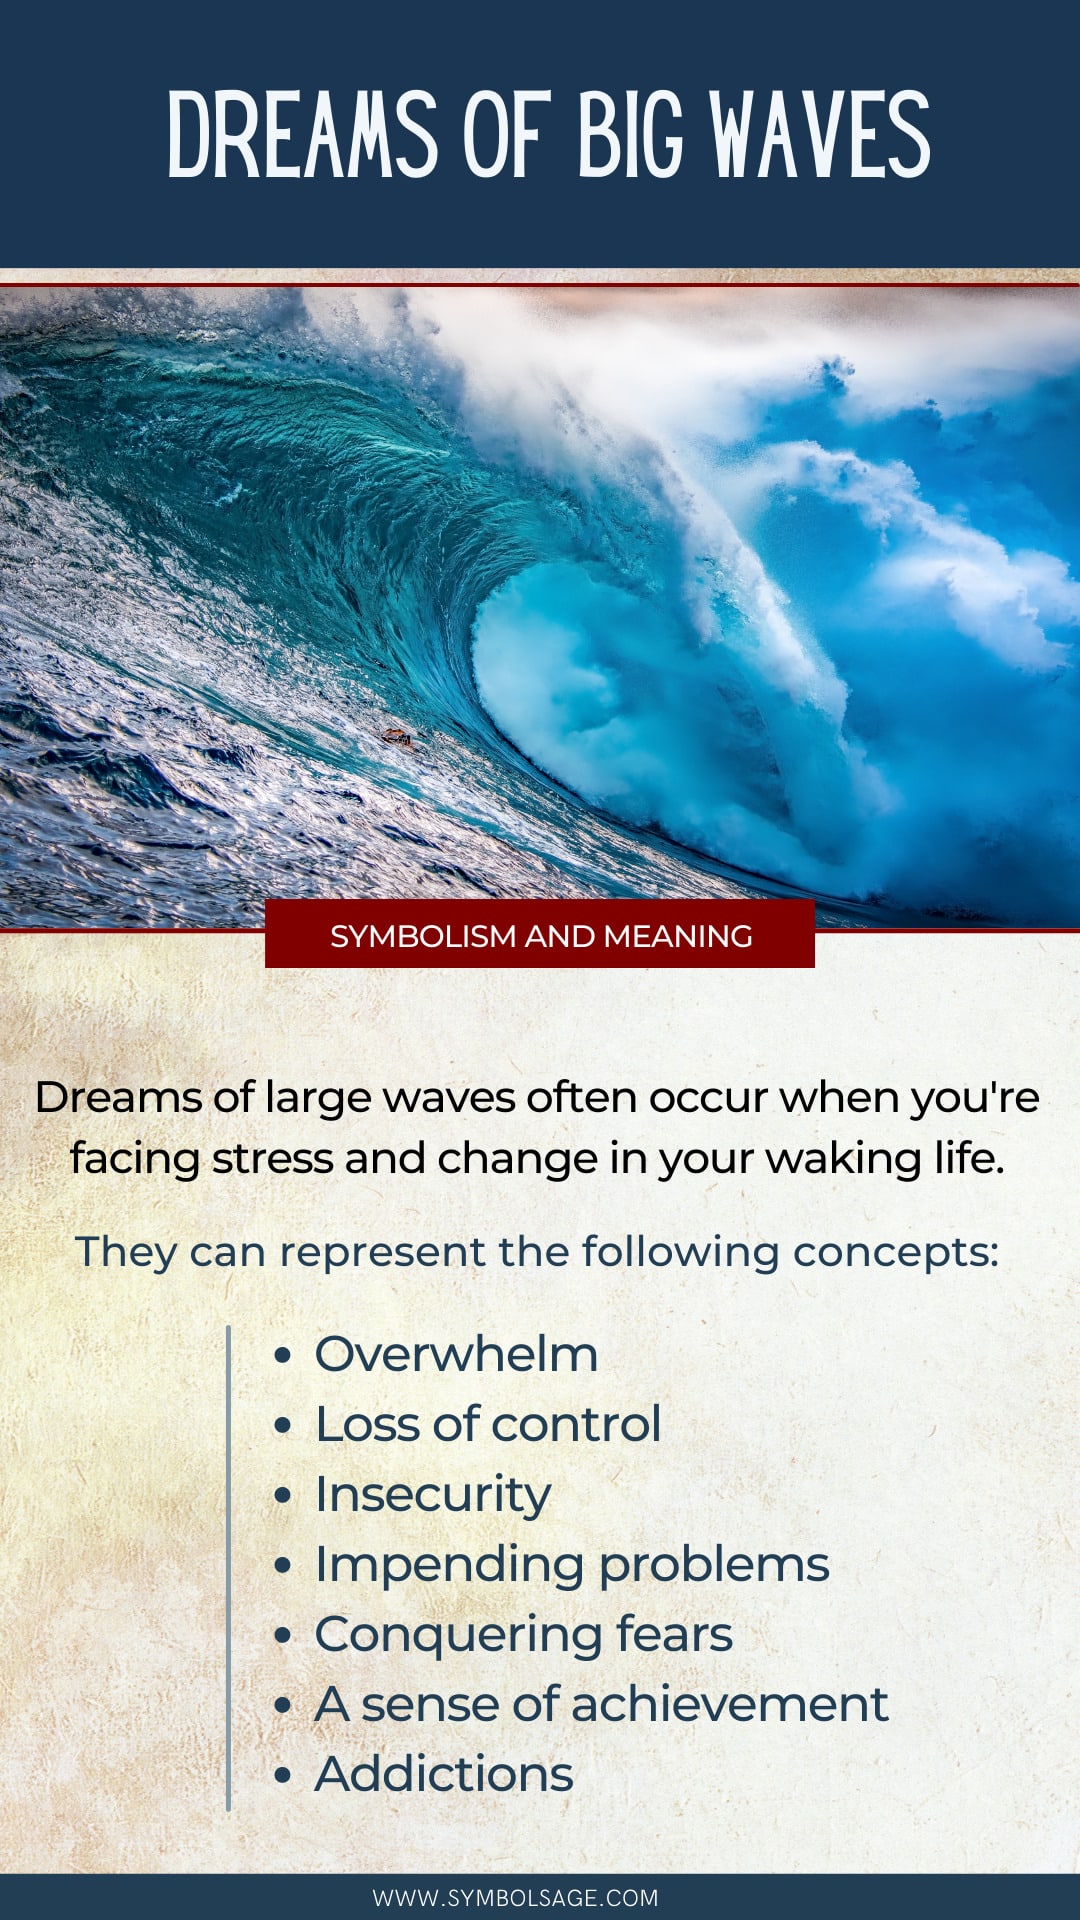 Big waves dream meaning